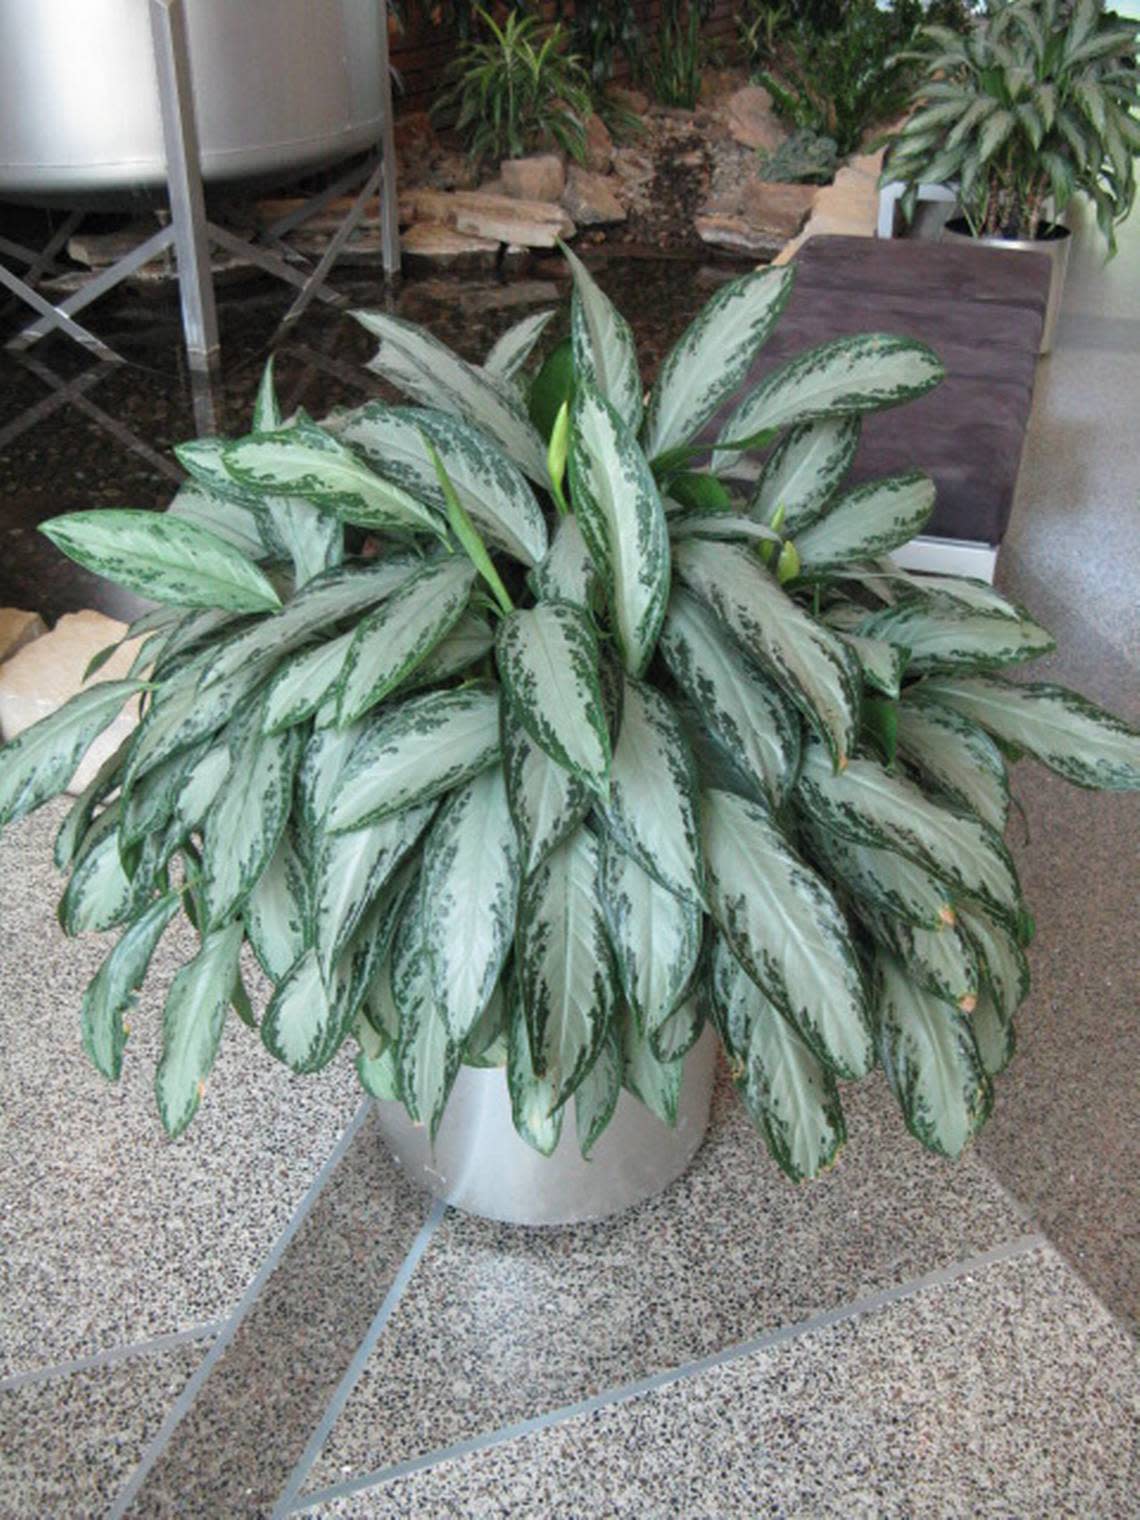 Caring for living plants, like this Chinese evergreen, feeds and nourishes the soul.